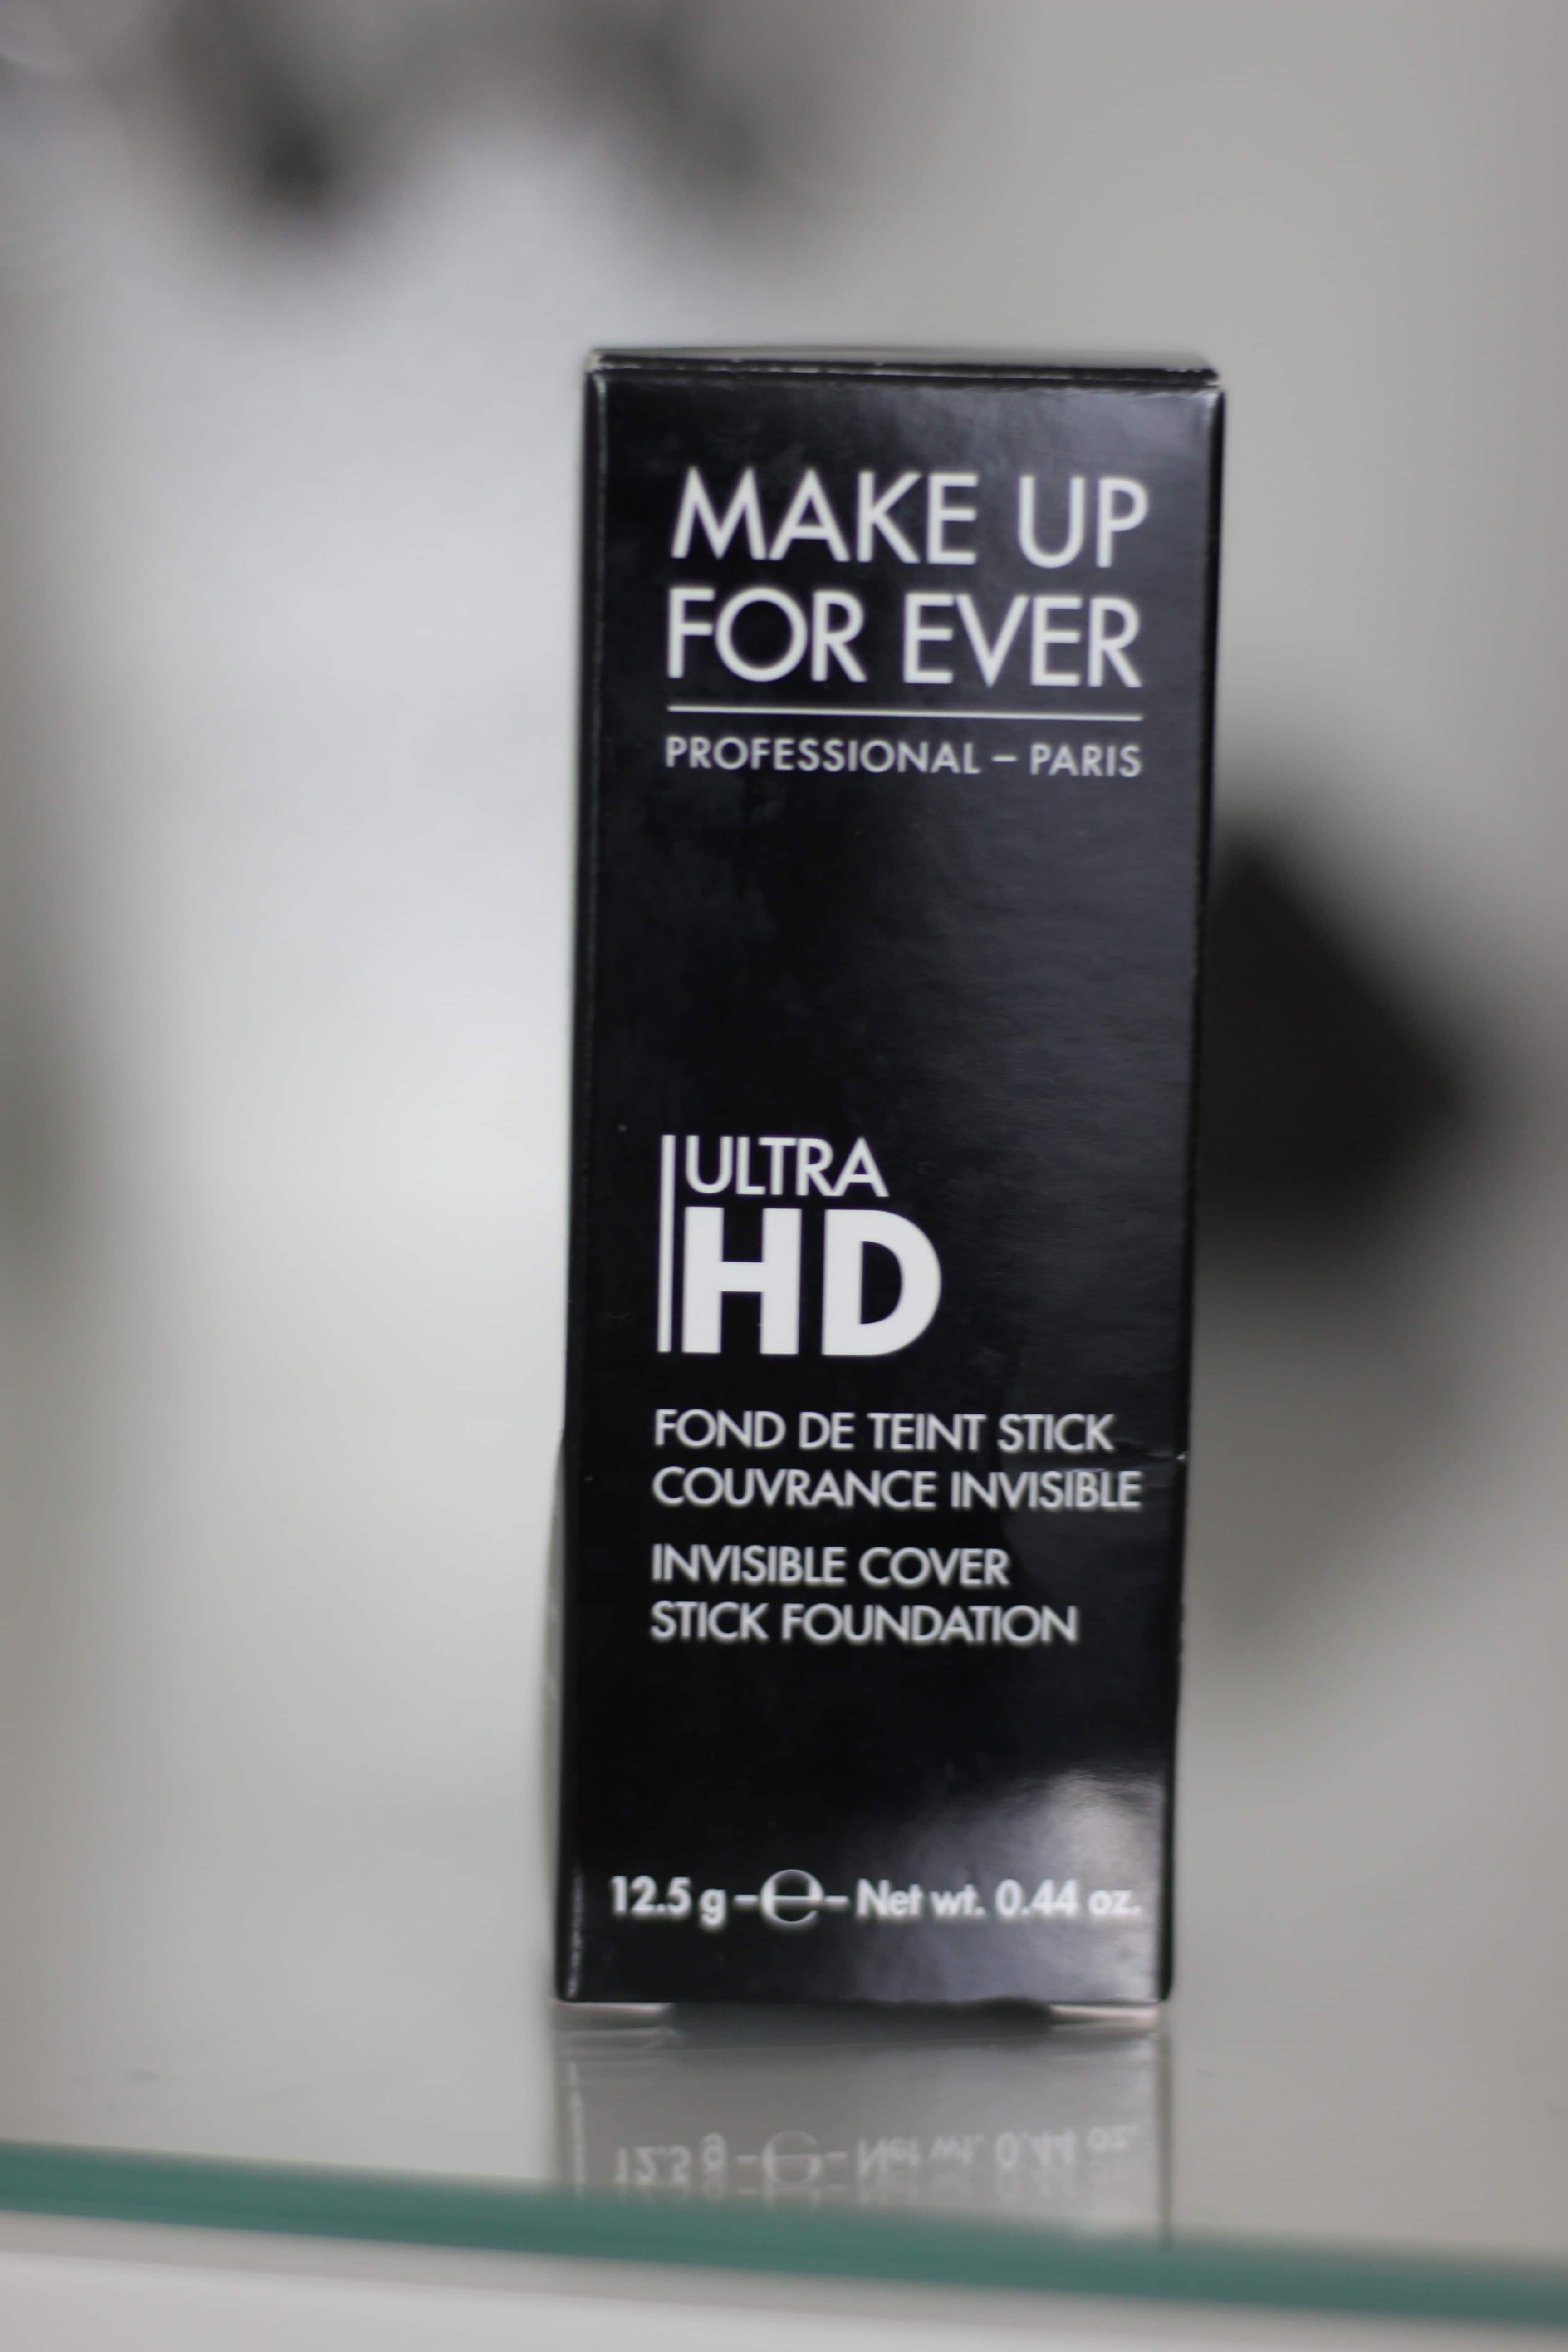 Ultra HD Stick Foundation - Foundation  Makeup forever hd foundation, Makeup  forever foundation, Makeup forever hd